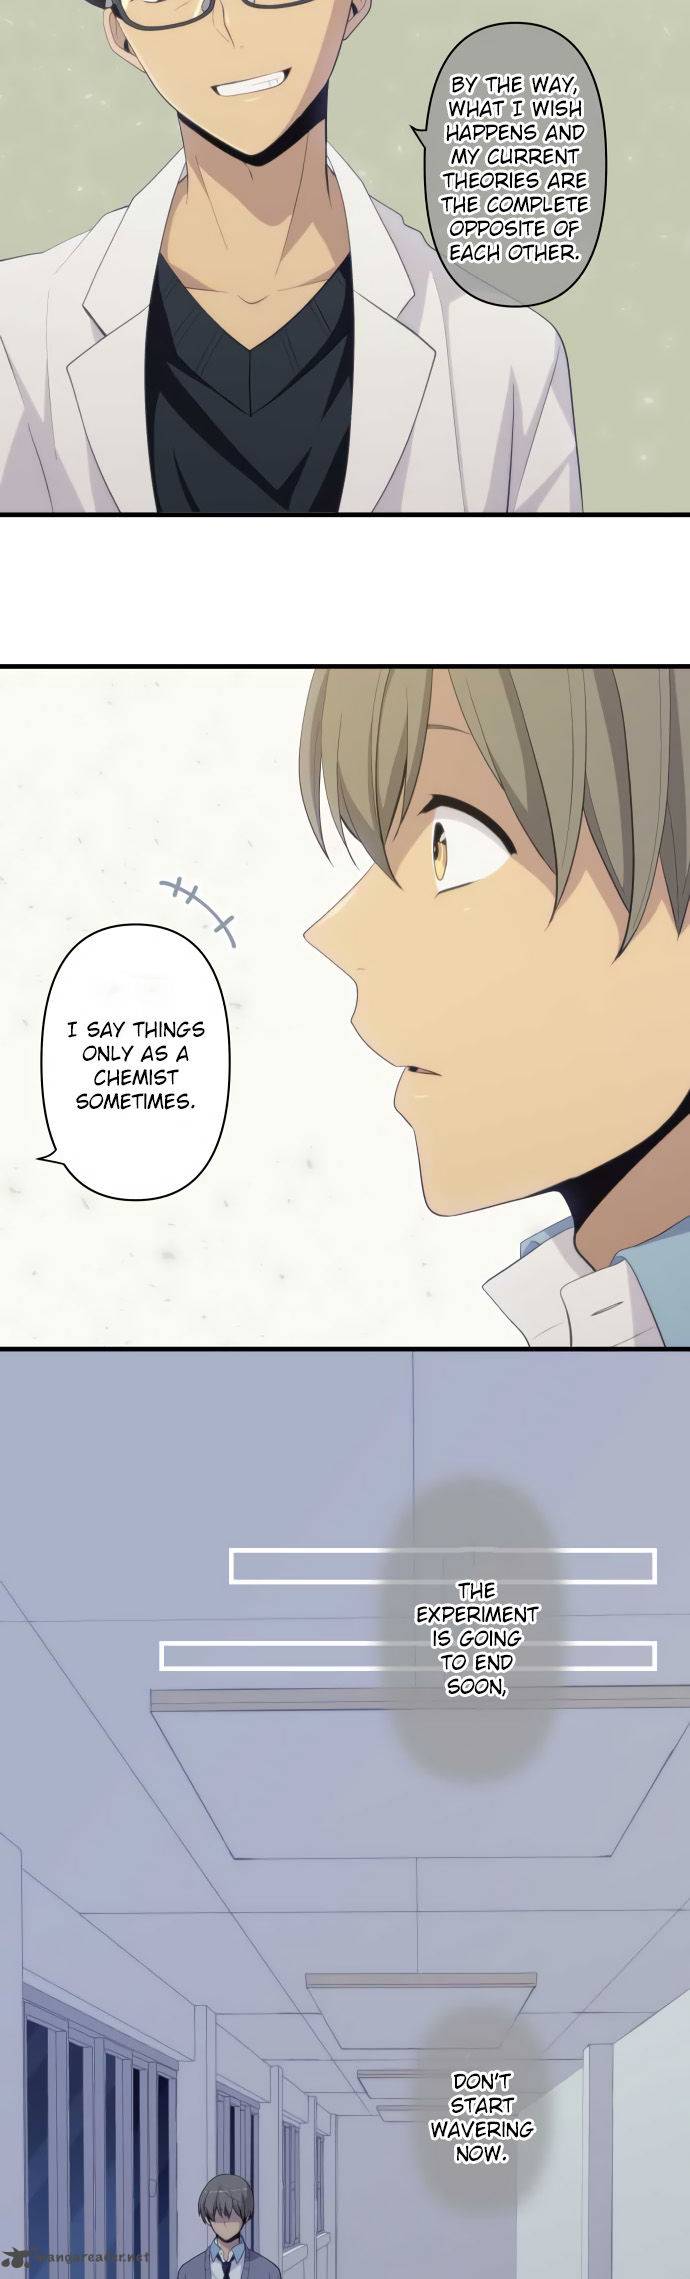 relife_204_15